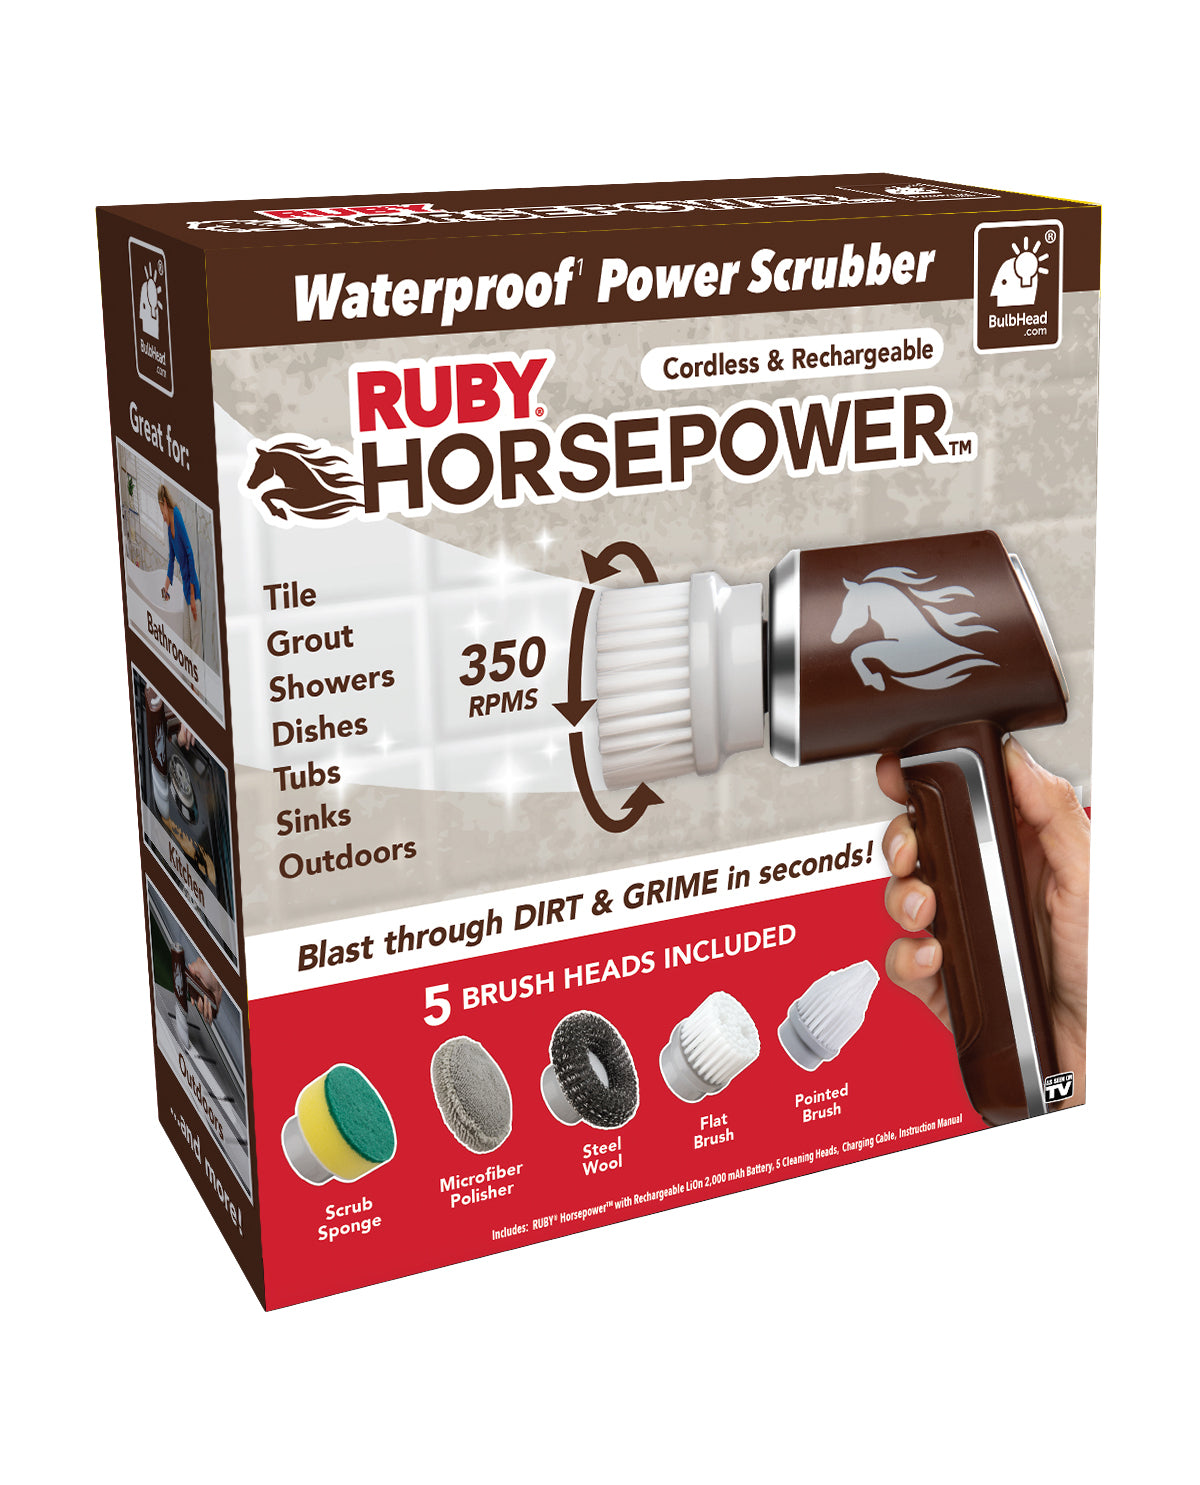 Ruby Horsepower Cordless & Rechargeable Scrubber